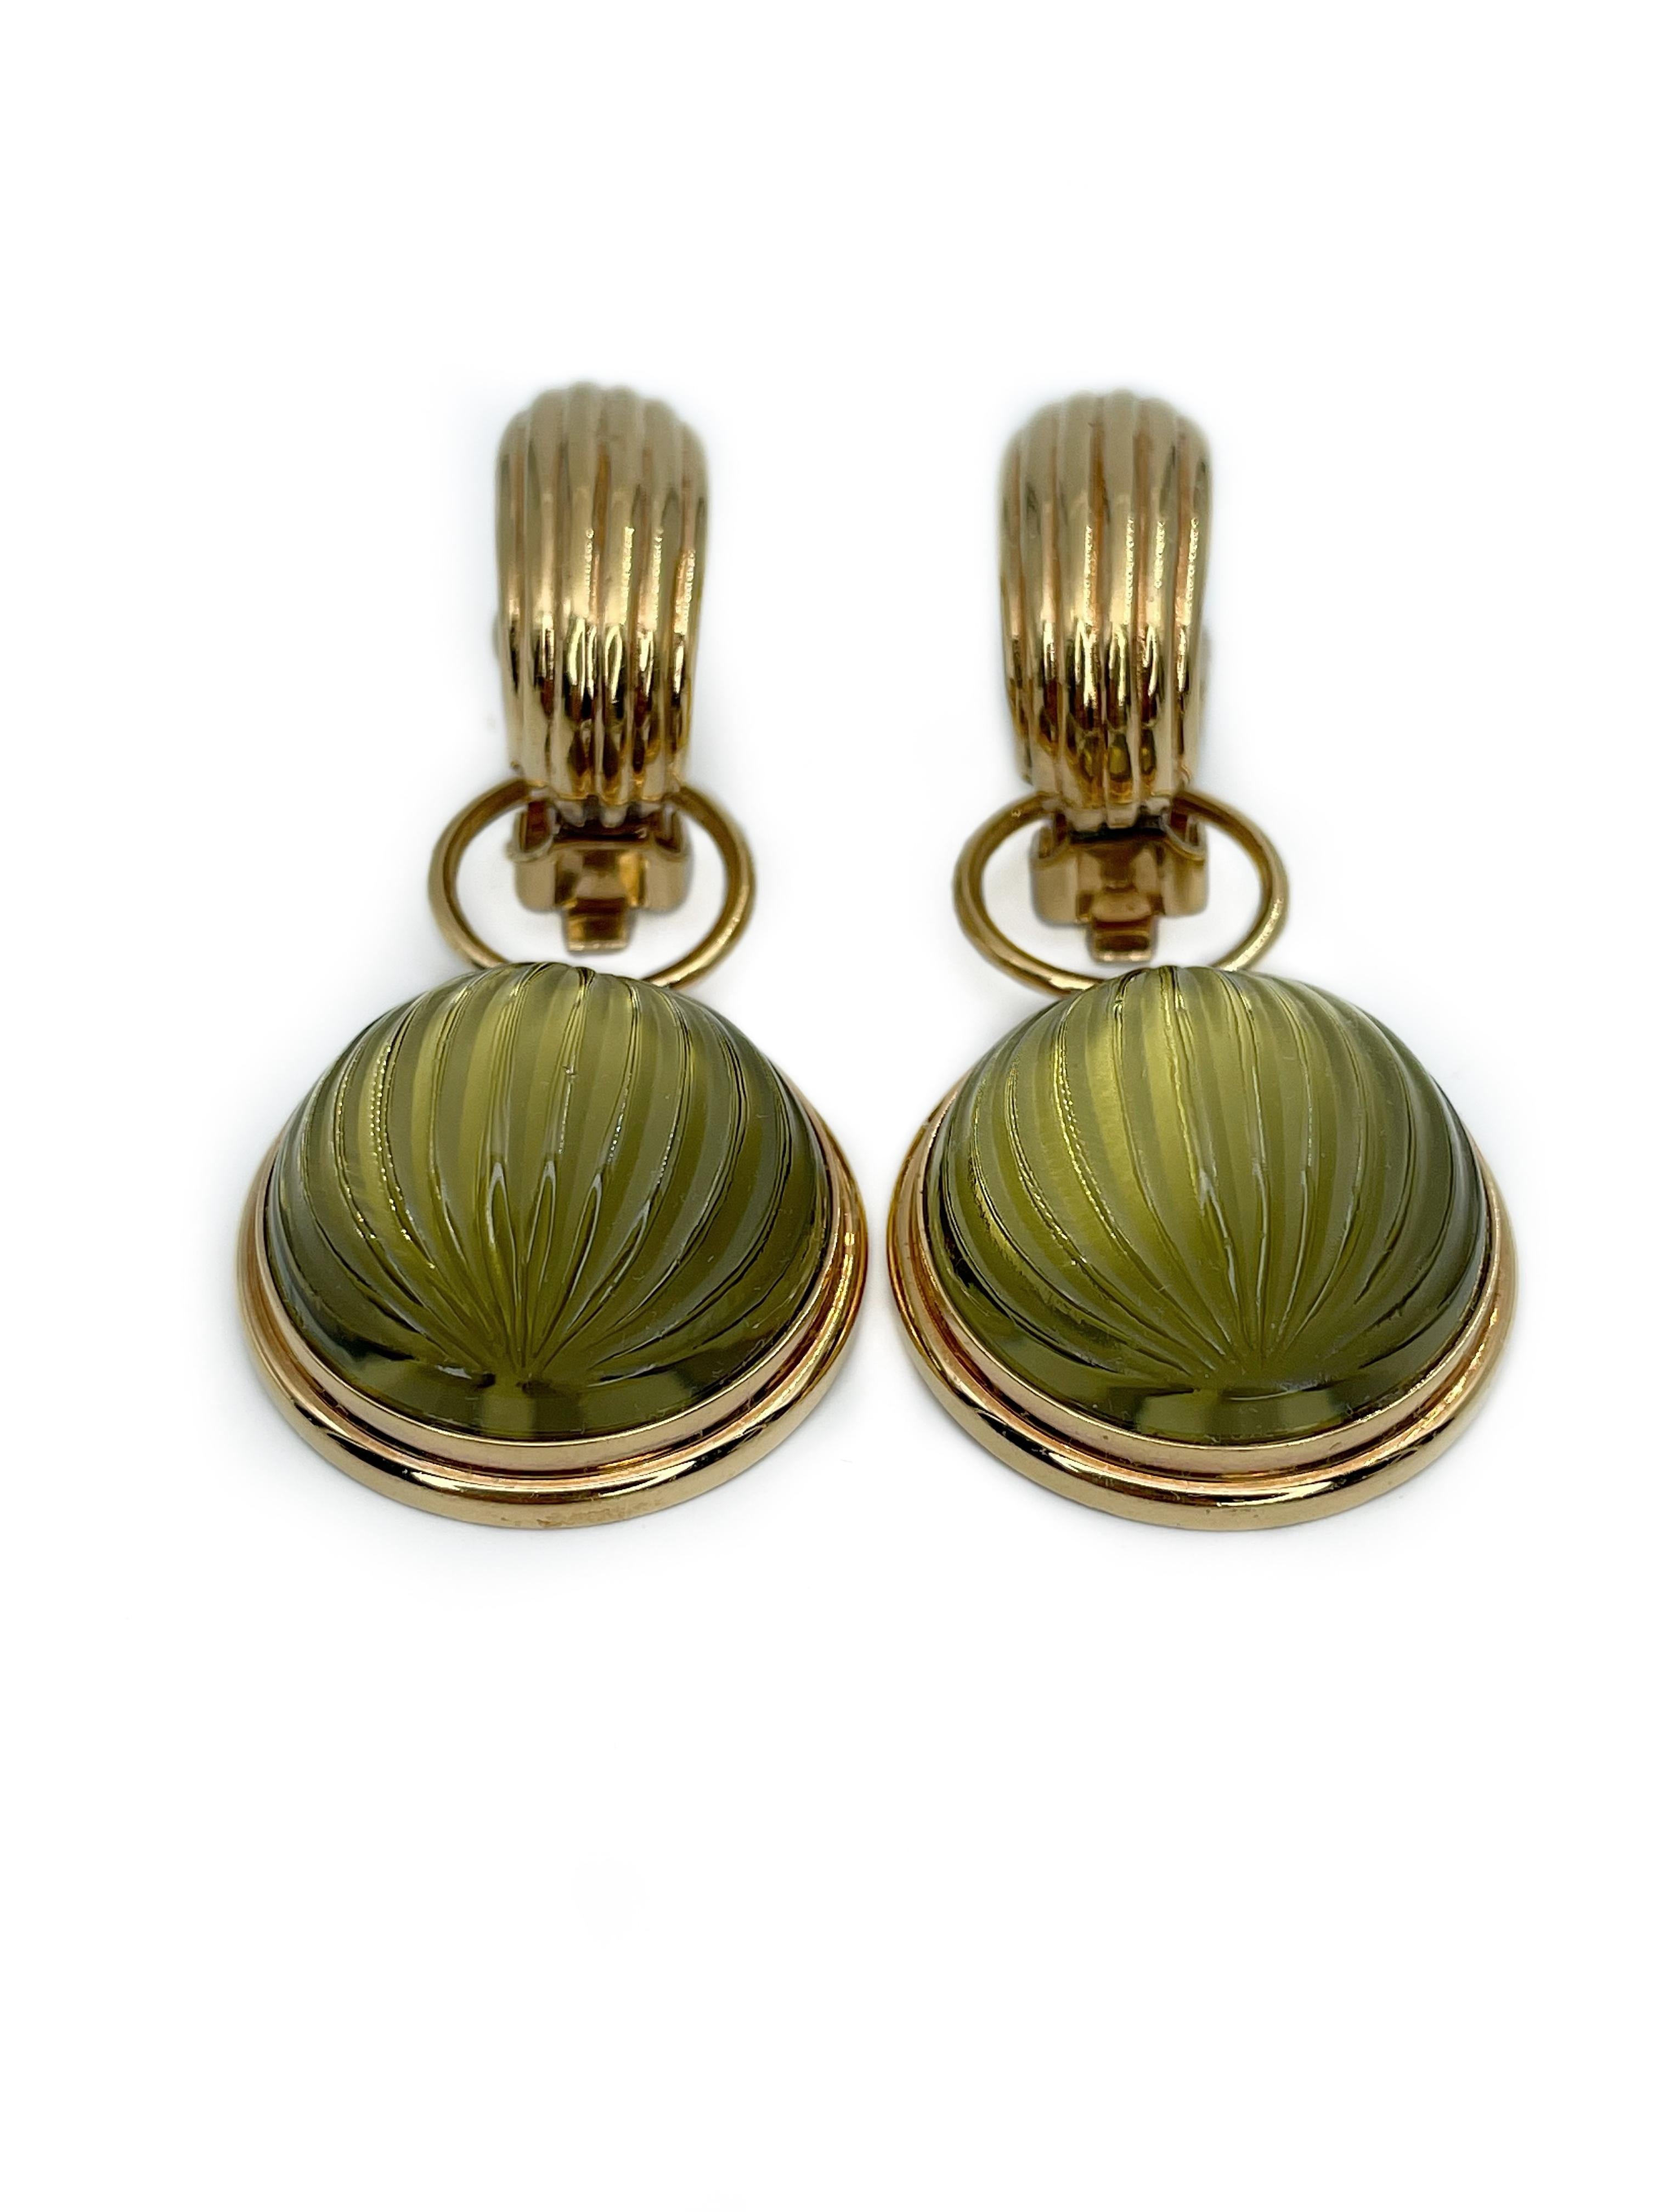 This is a gorgeous pair of large gold tone clip on earrings designed by Lalique in 1990’s. The piece is gold plated and features beautiful olive green pressed glass cabochons. These earrings can be worn in different ways by removing the bottoms.